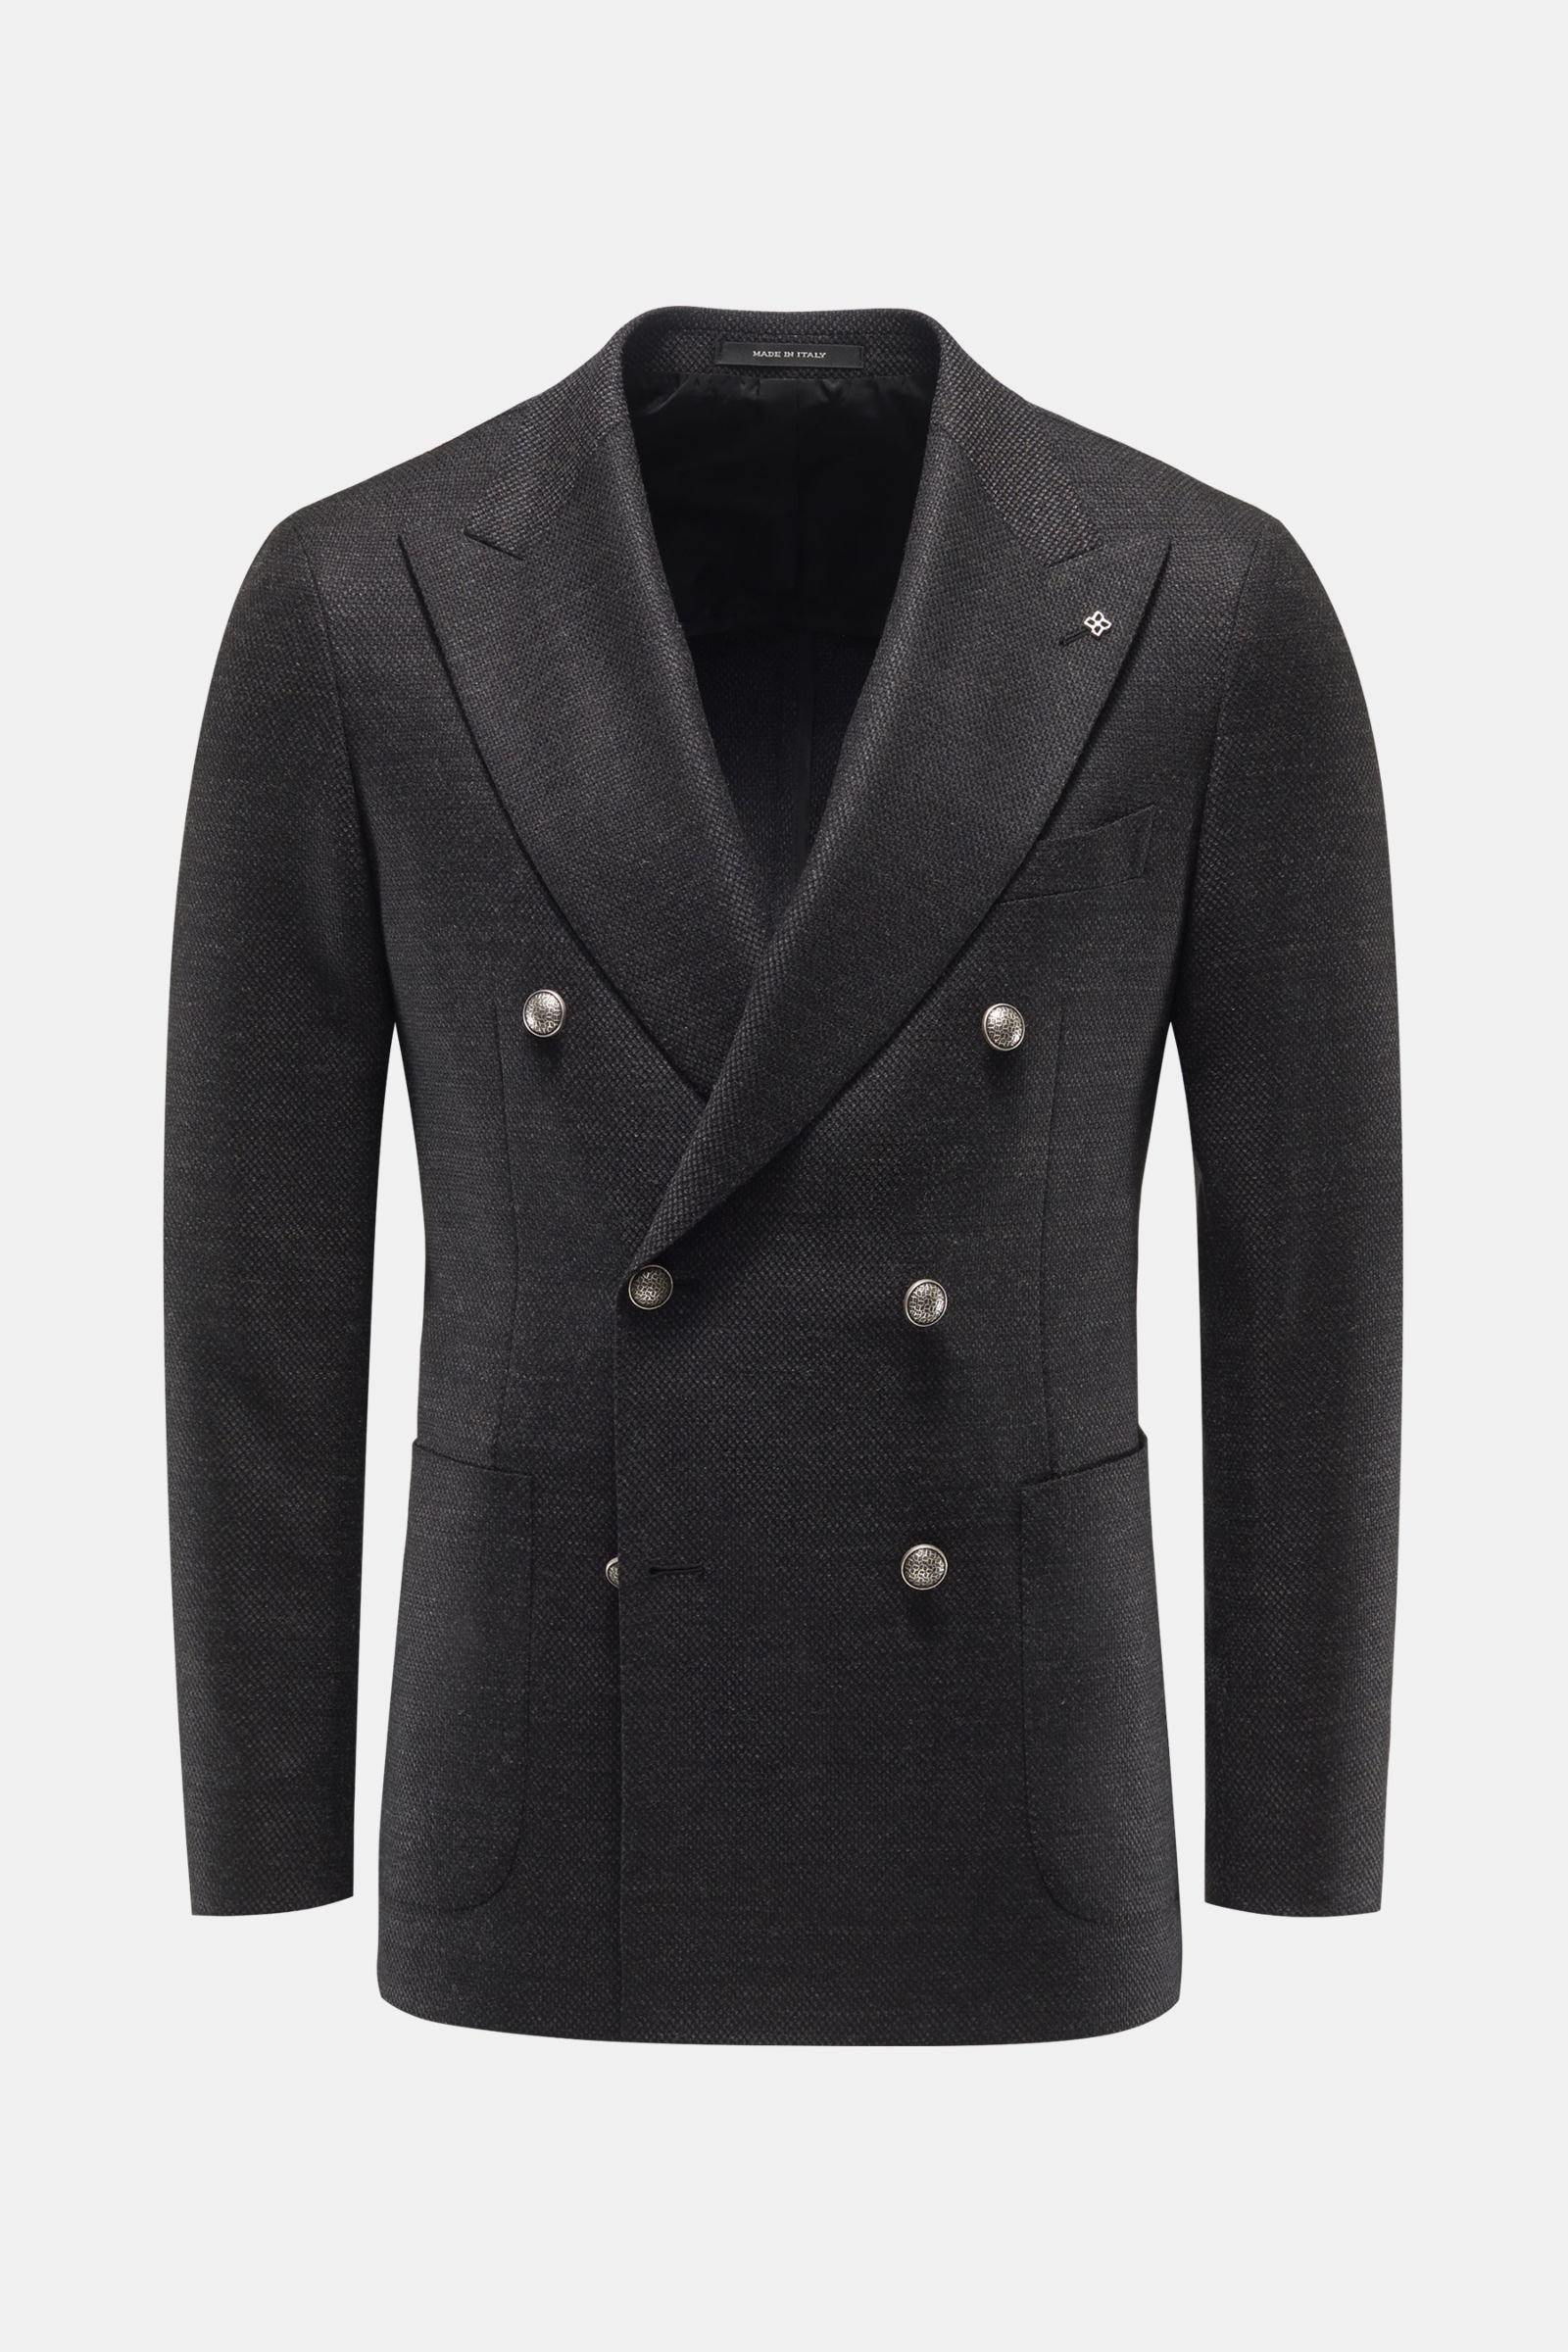 Smart-casual jacket anthracite